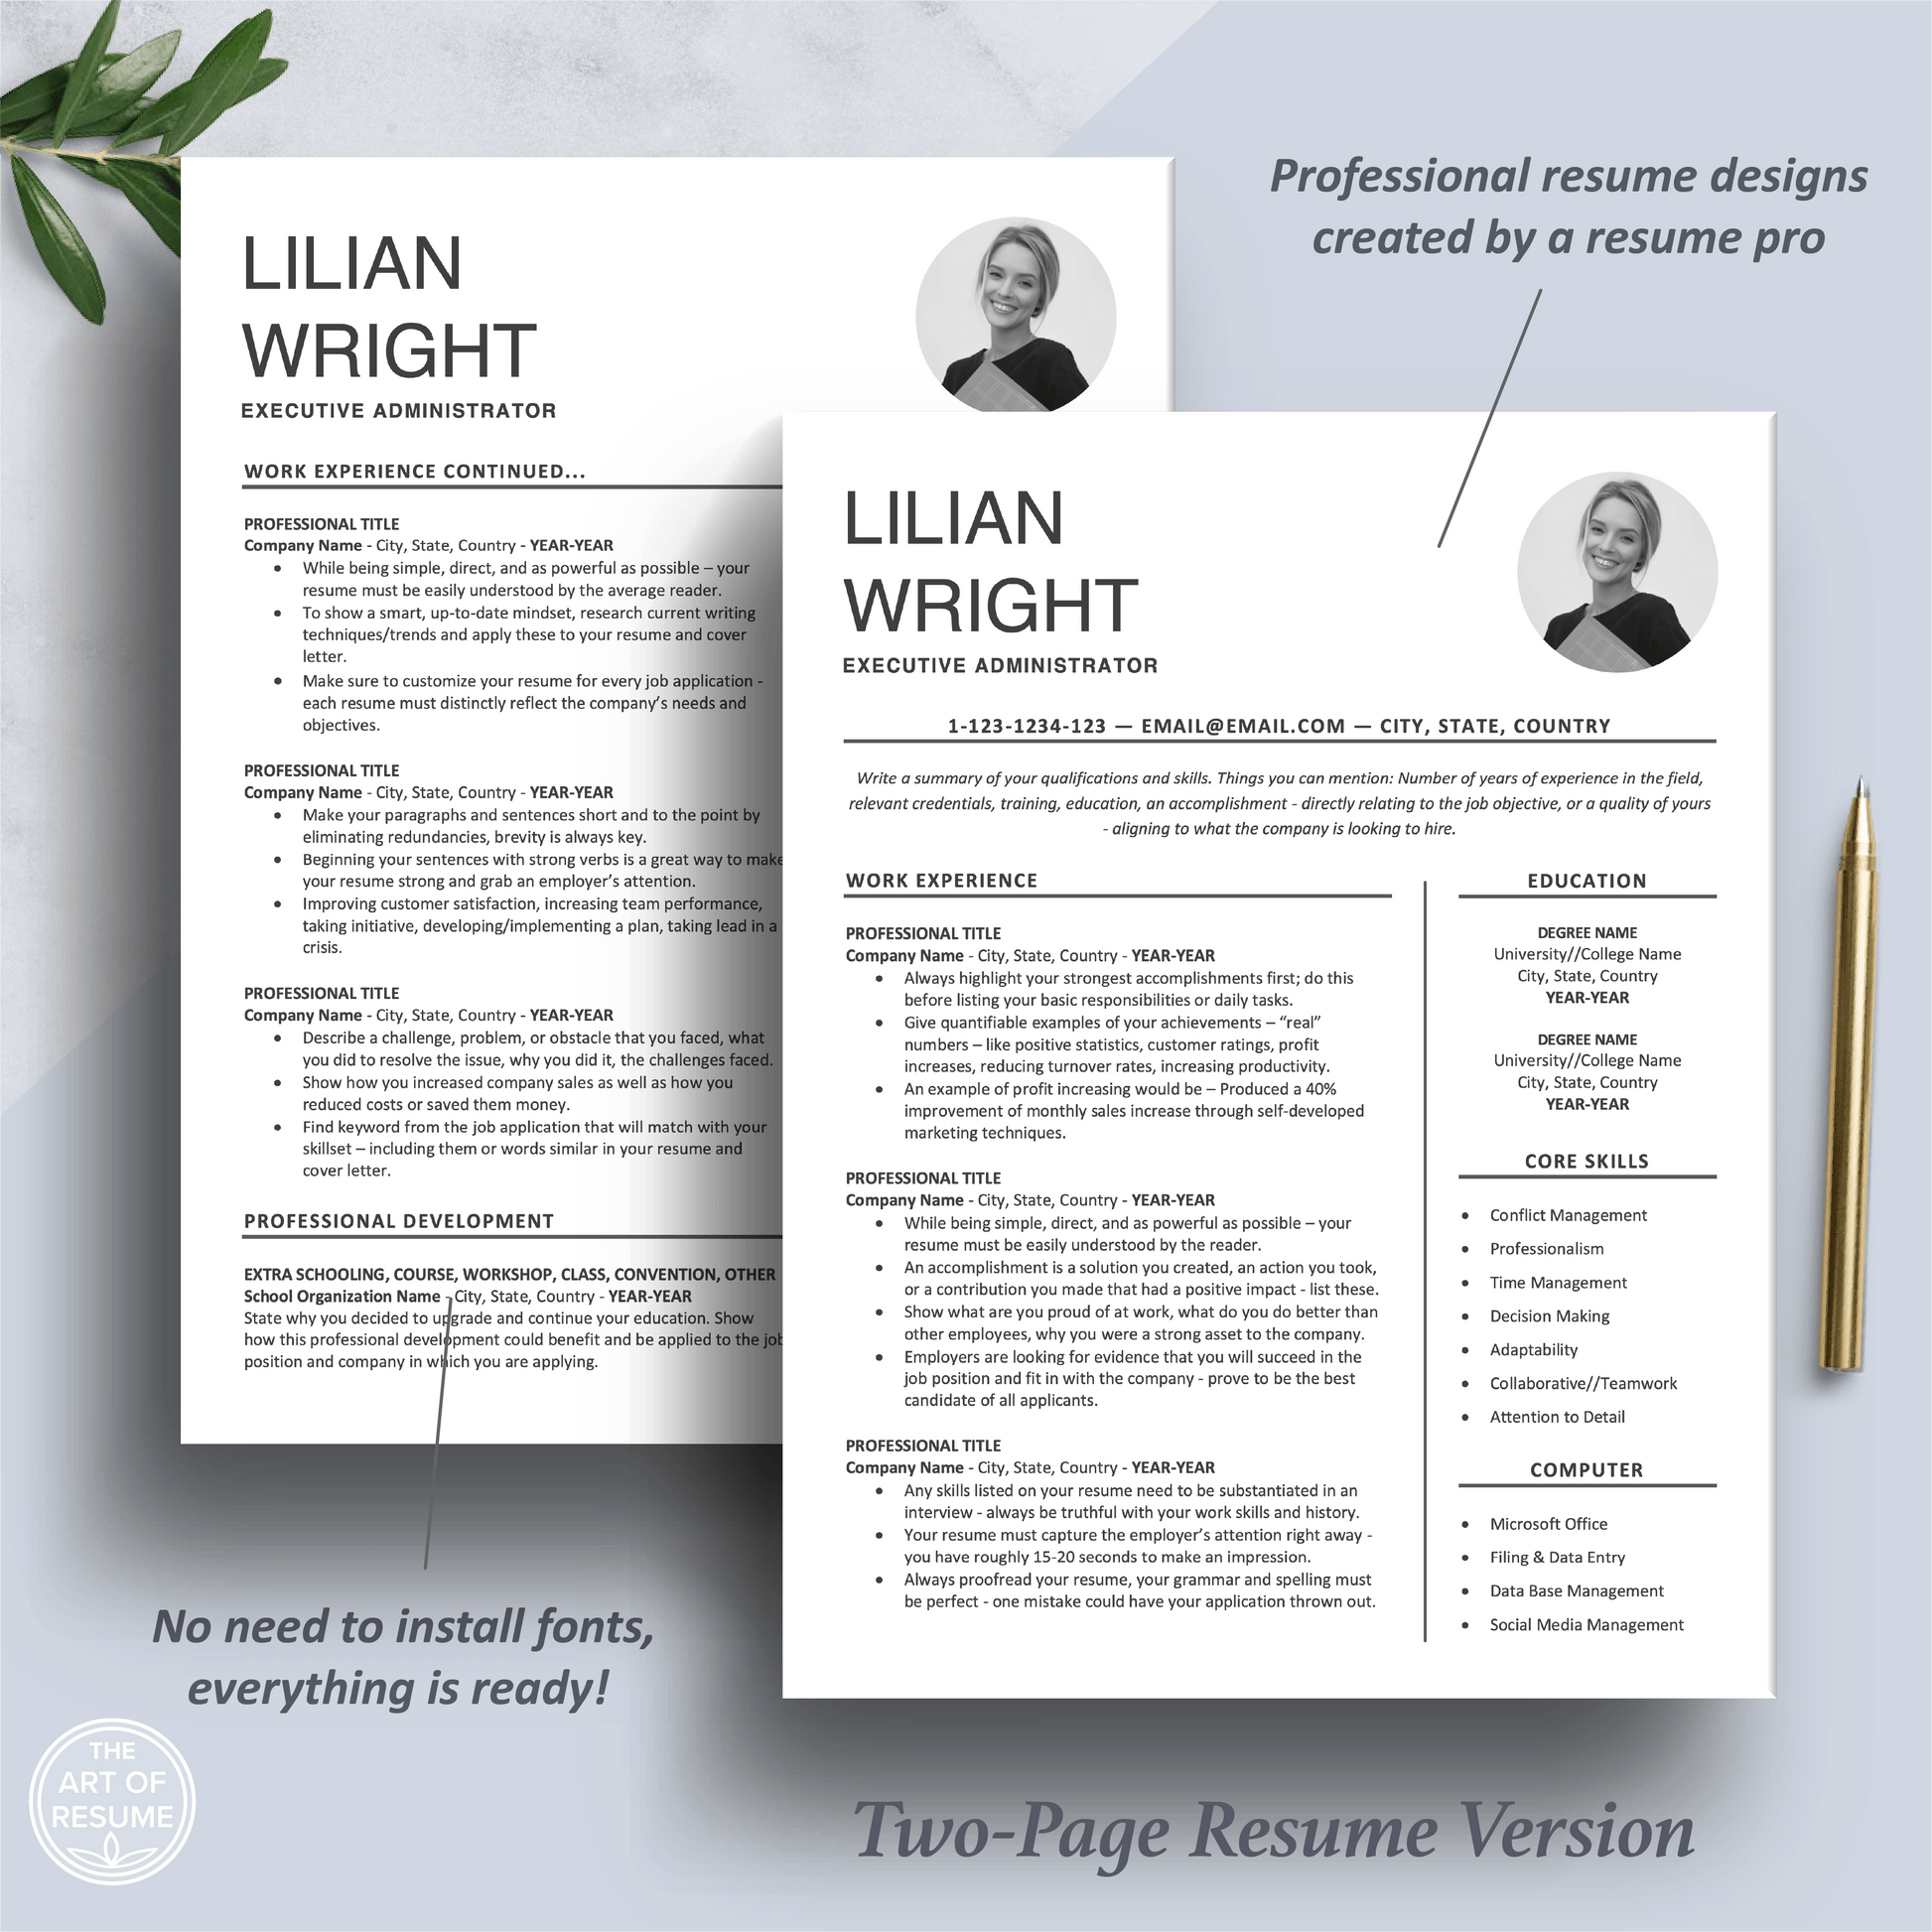 Professional Resume with Photo | Modern Resume with Profile Picture - The Art of Resume